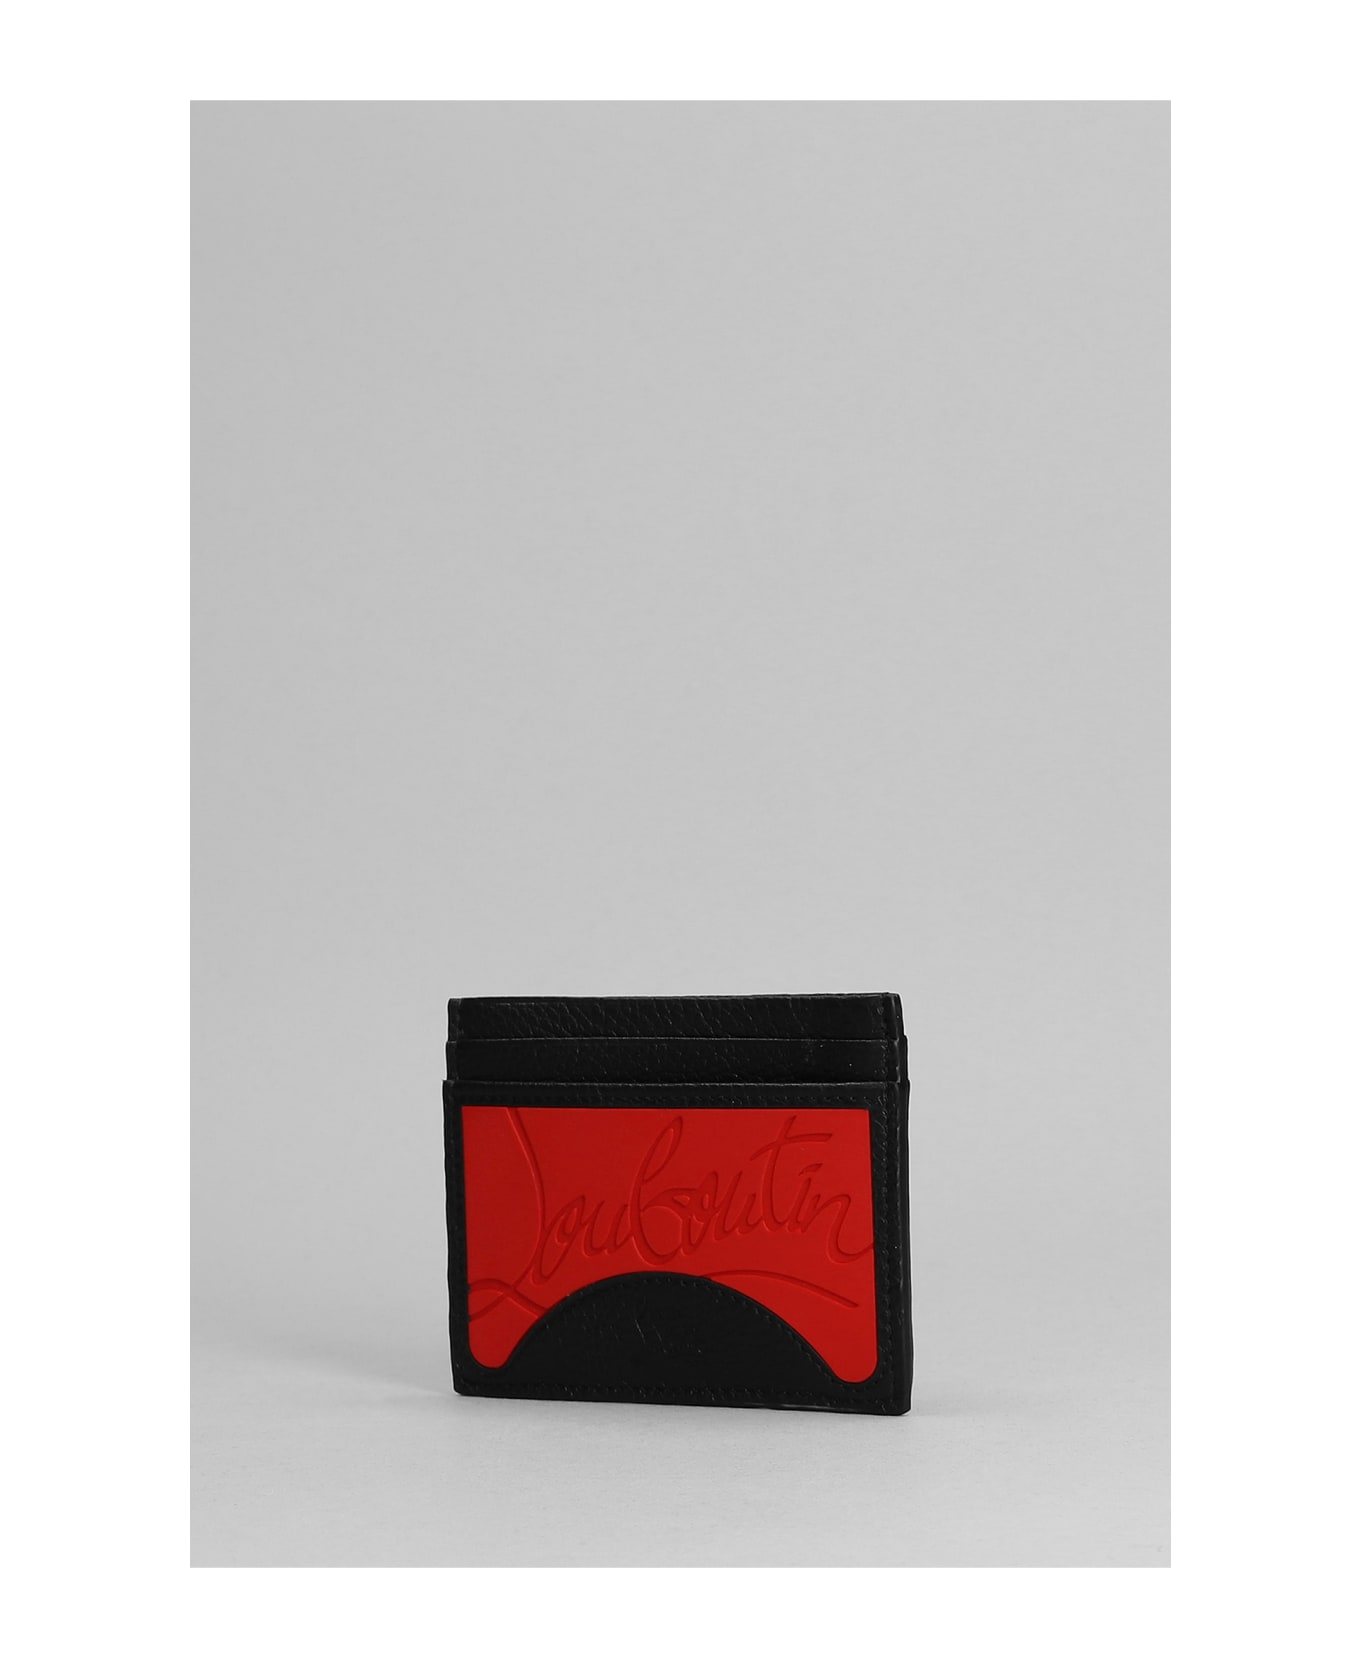 Christian Louboutin Wallet In Red Leather - Loubi/black 財布